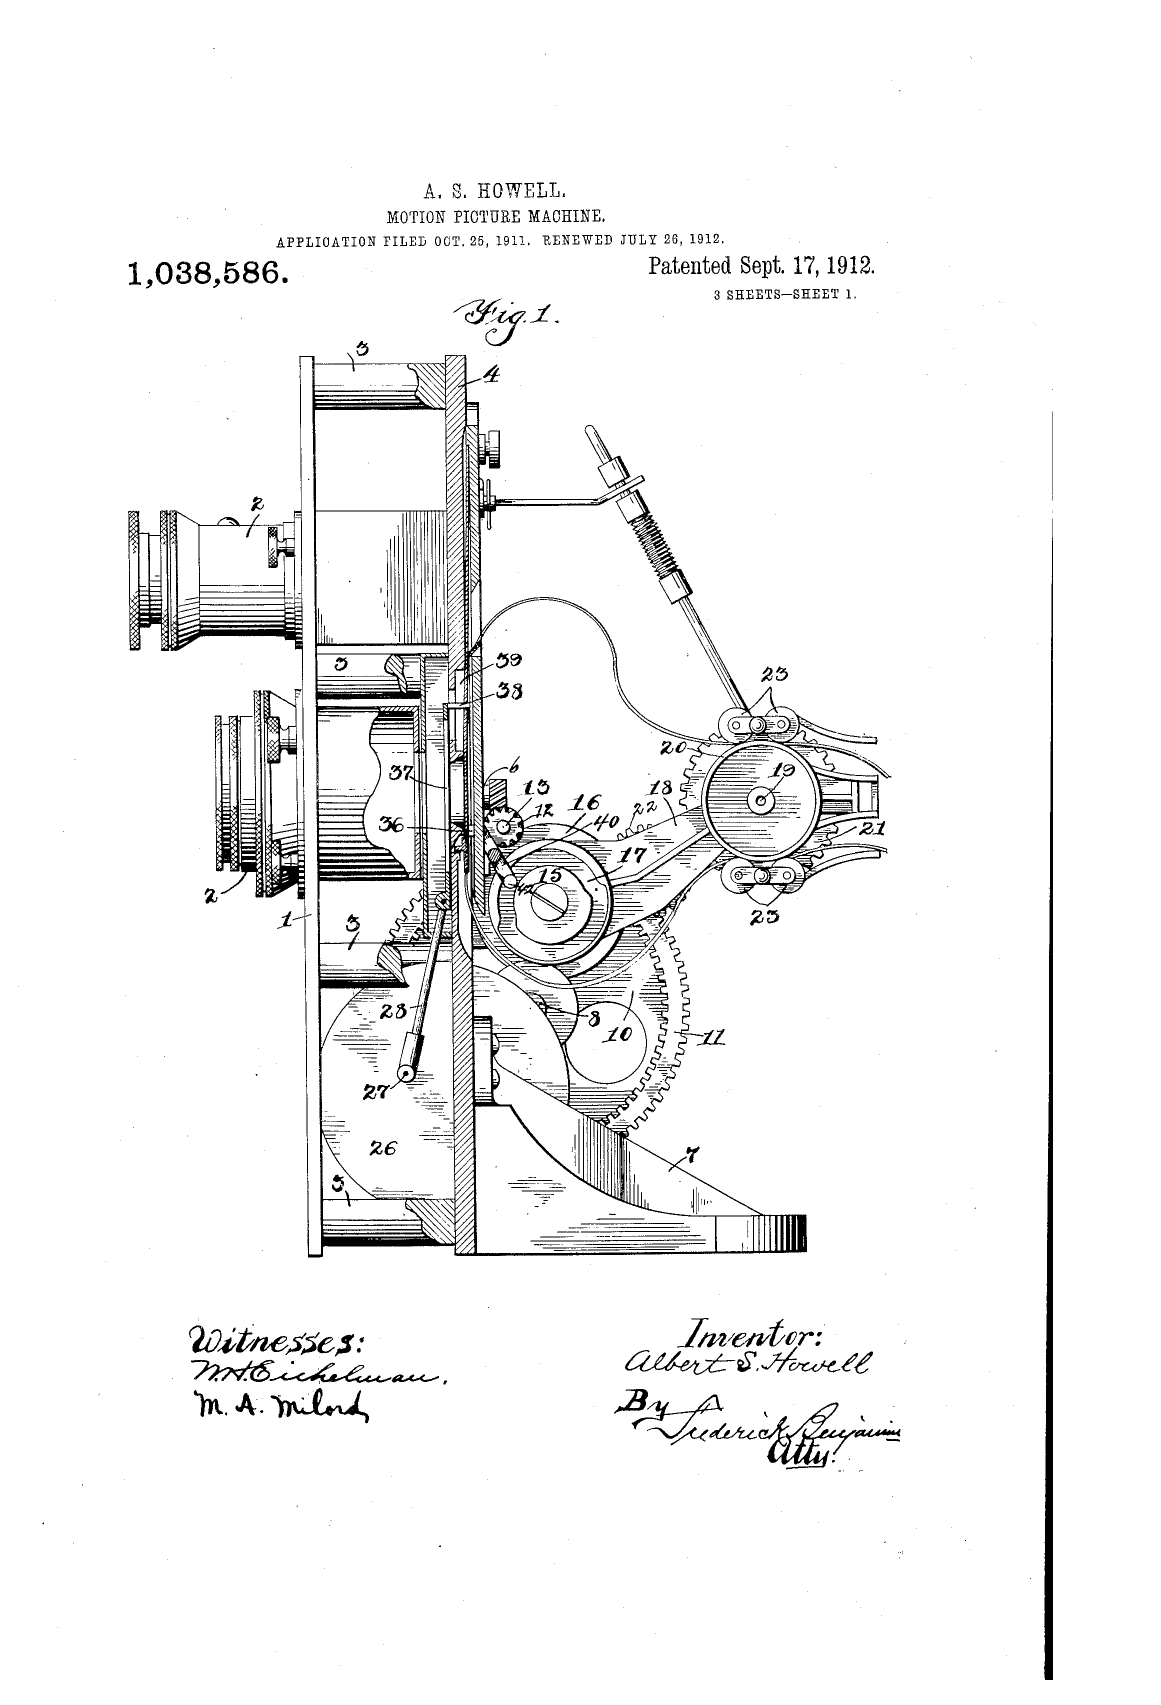 Page one of the patent, containing a full-page drawing of a sectional view of the camera’s motor. Important information such as Howell's name, his signature, a filing witness's signature and the date are also included.